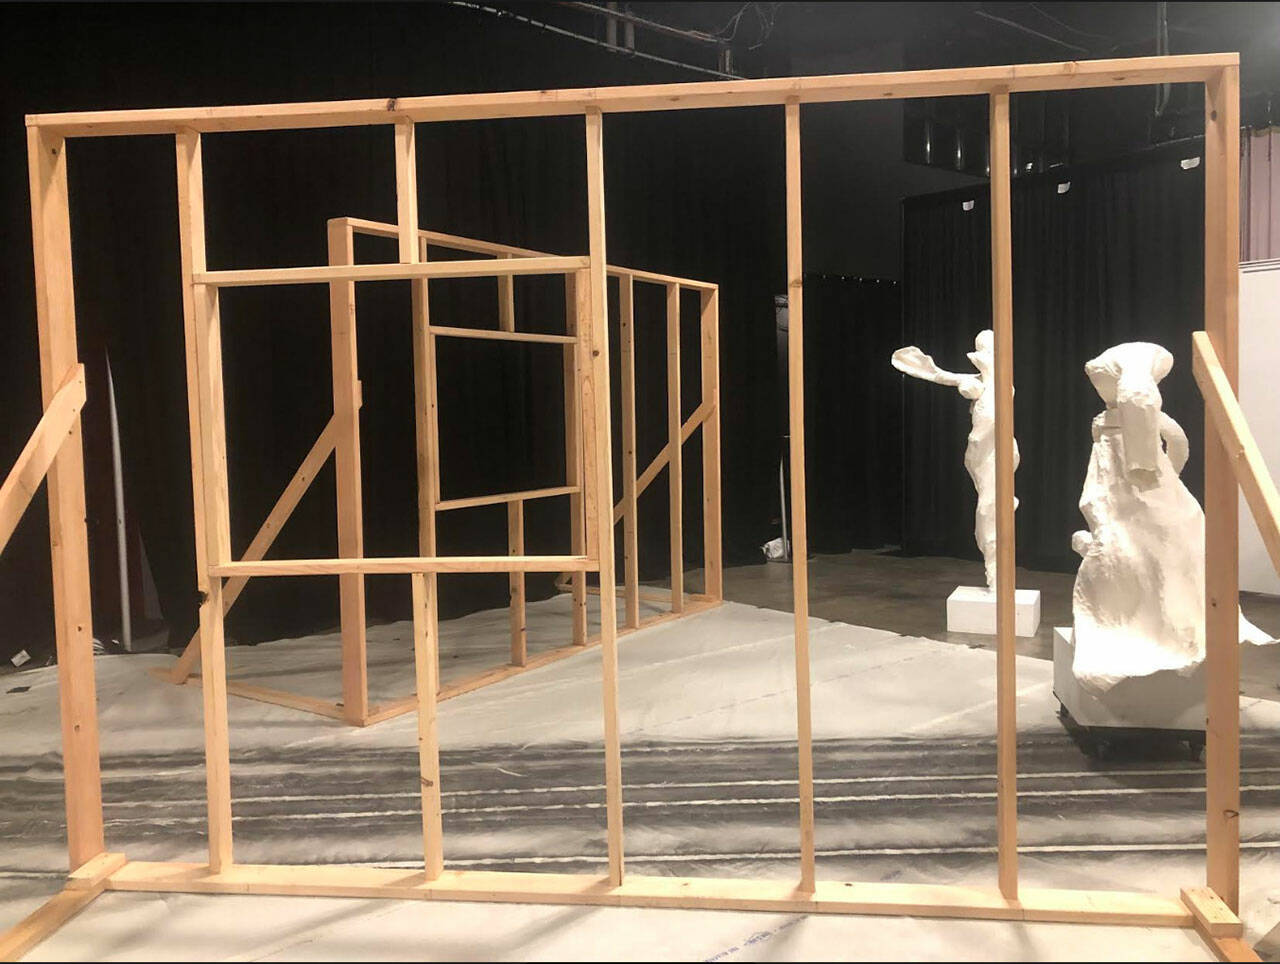 (Courtesy Photo) Construction has been underway since January, as Open Space for Arts Community’s new artist-in-residence Julia Wilkins prepares “Solitude_The Exhibition.”